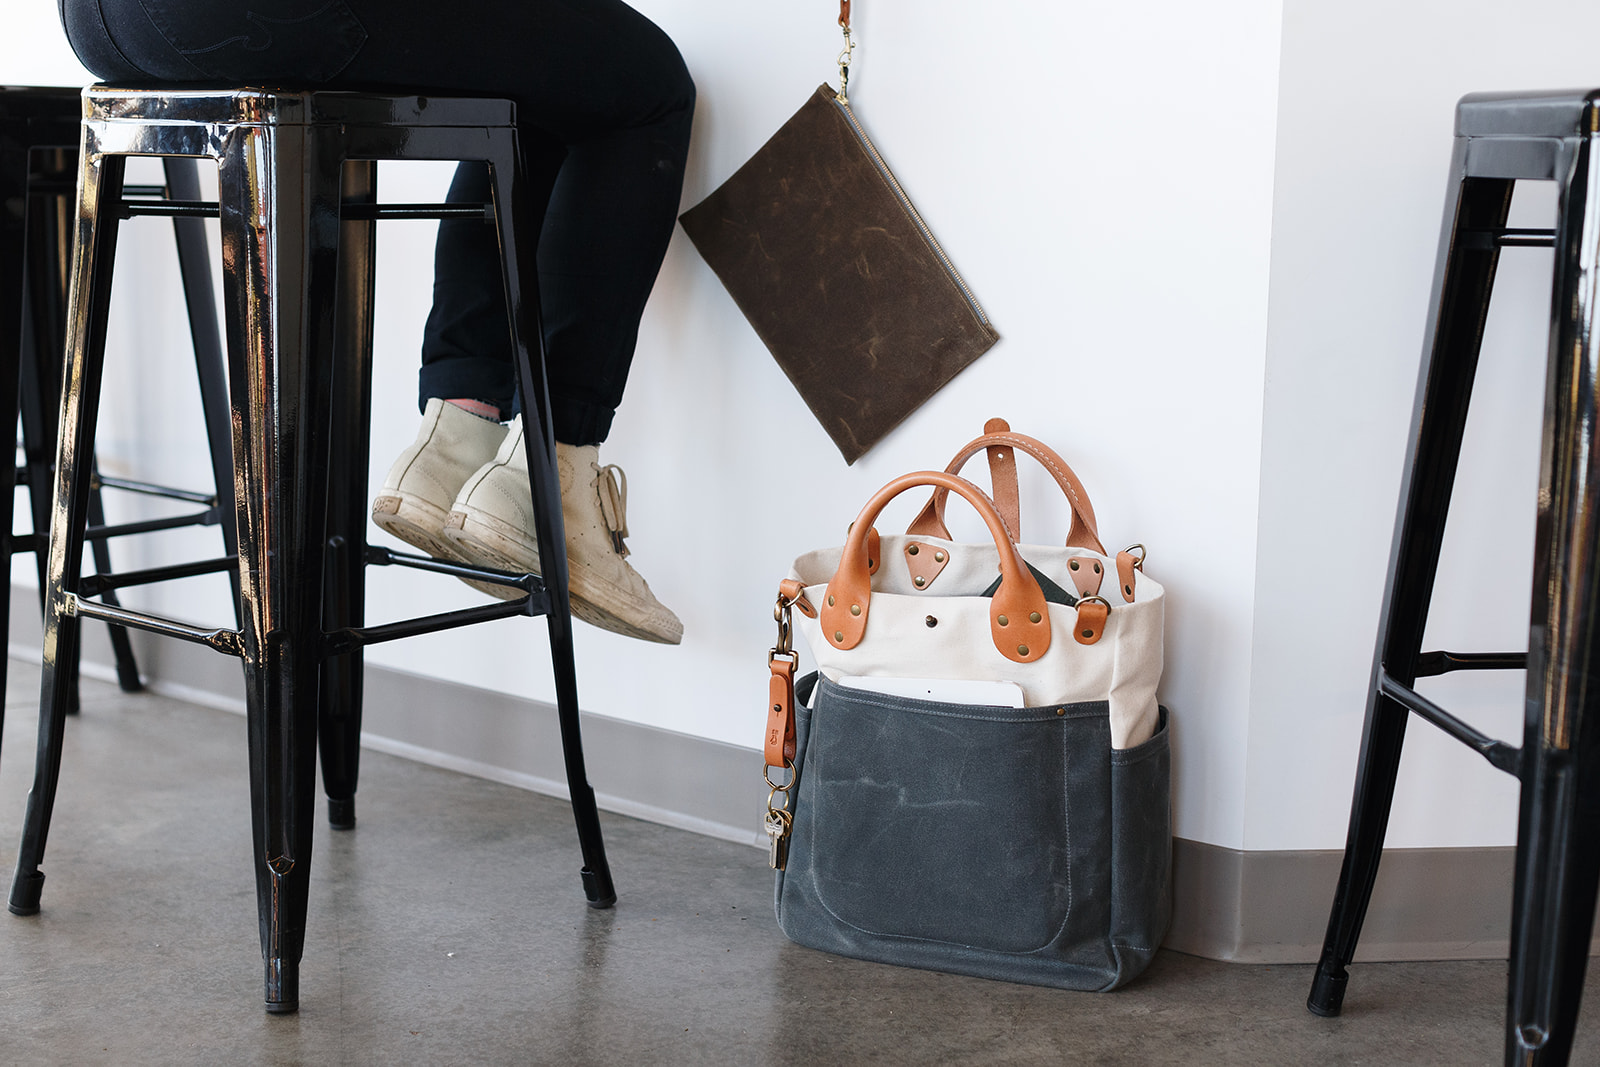 Abby Schirmacher, 303 Magazine, Travel Bags, Pandemic, Logan and Lenora, Winter Session, Sword and Plough, The Fix Leather Studio, Denver Fashion, Leather Goods, Bags